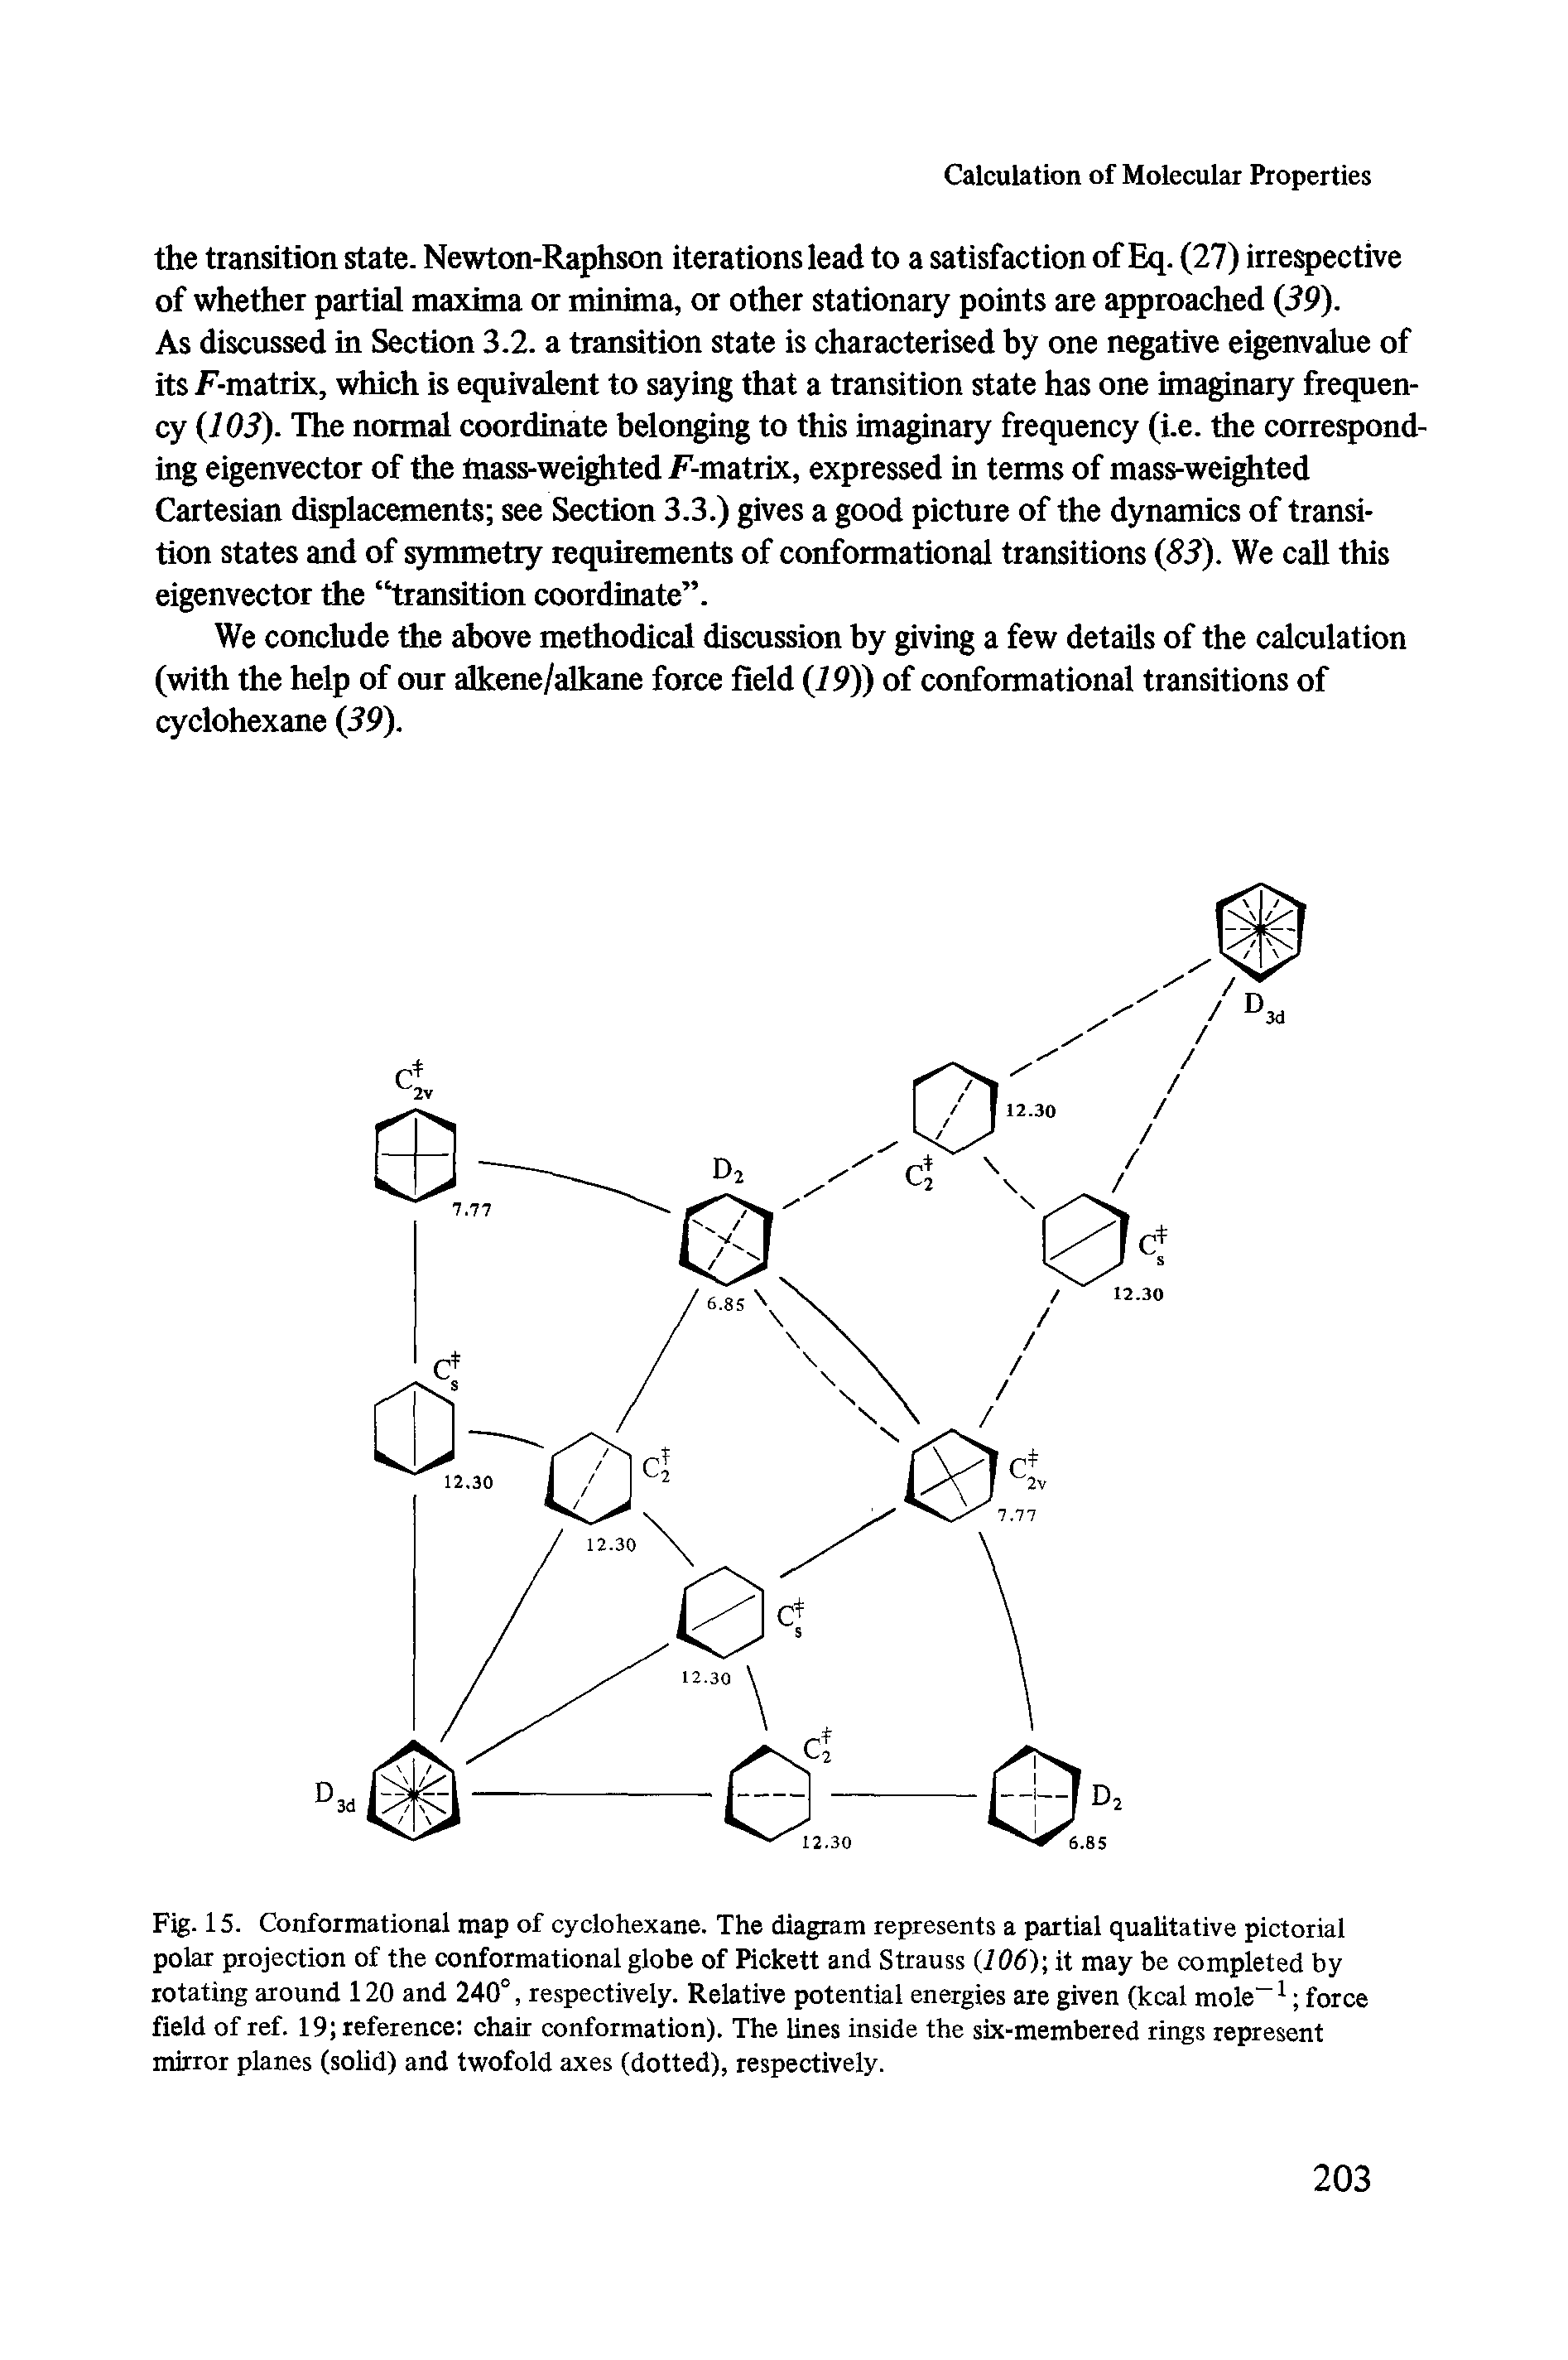 Fig. 15. Conformational map of cyclohexane. The diagram represents a partial qualitative pictorial polar projection of the conformational globe of Pickett and Strauss (106) it may be completed by rotating around 120 and 240°, respectively. Relative potential energies are given (kcal mole-1 force field of ref. 19 reference chair conformation). The lines inside the six-membered rings represent mirror planes (solid) and twofold axes (dotted), respectively.